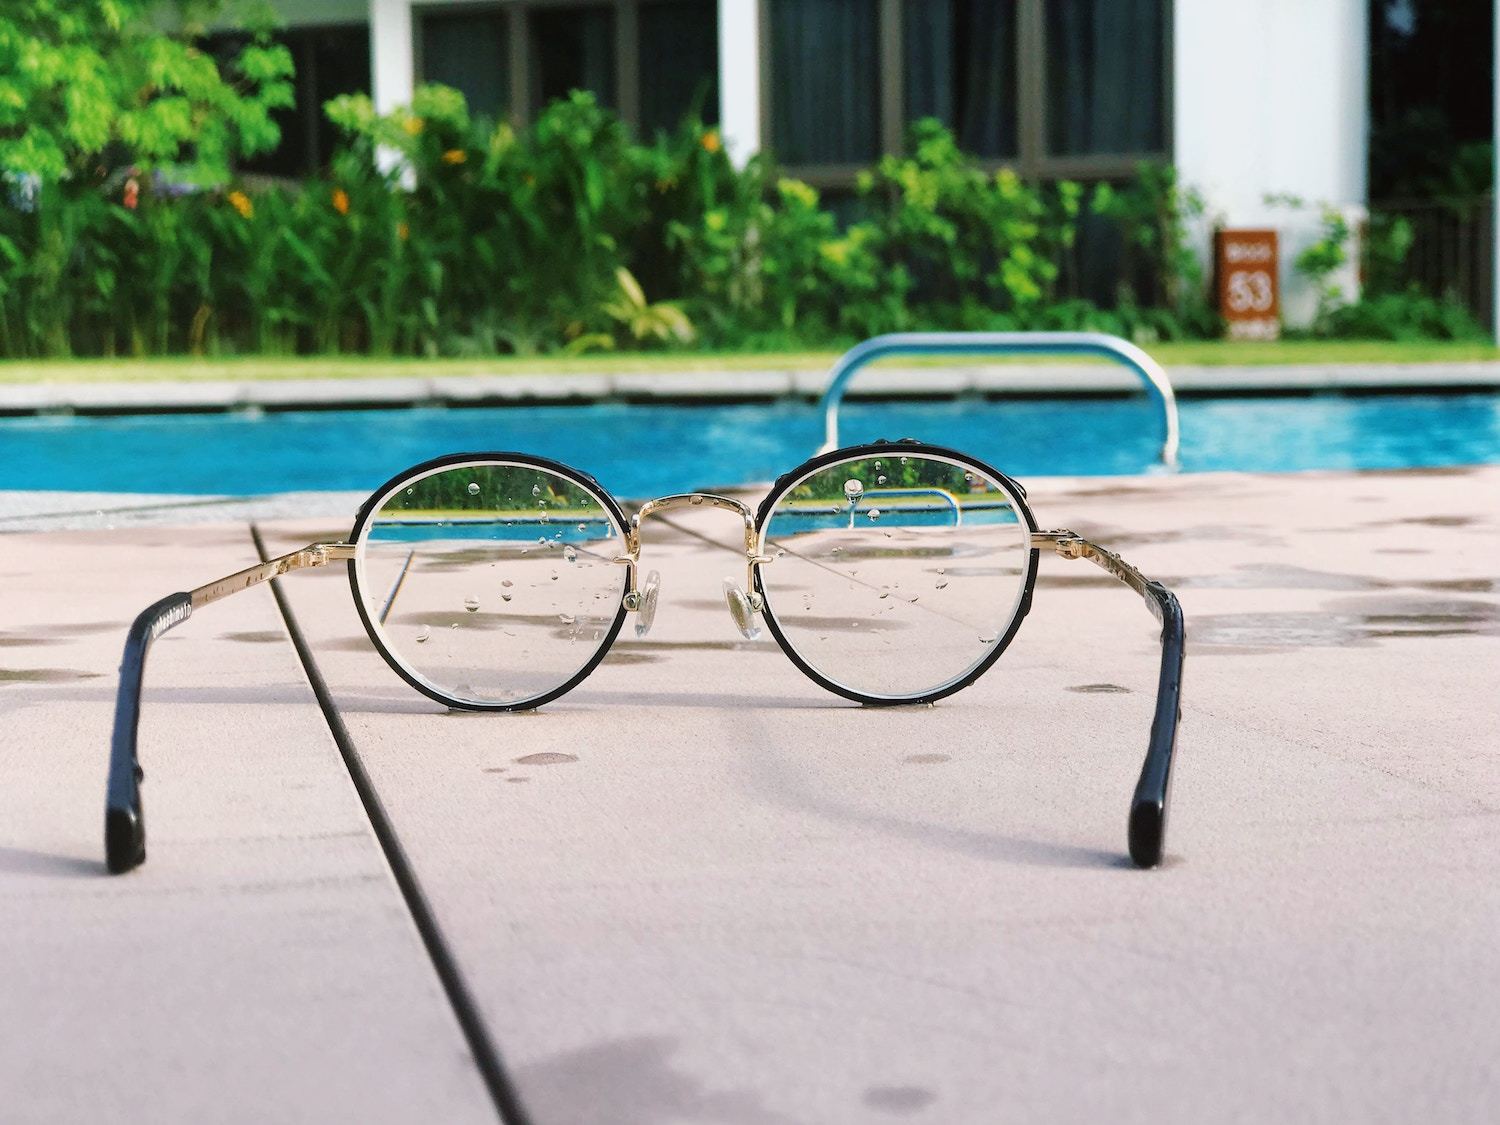 pair of glasses in front of pool